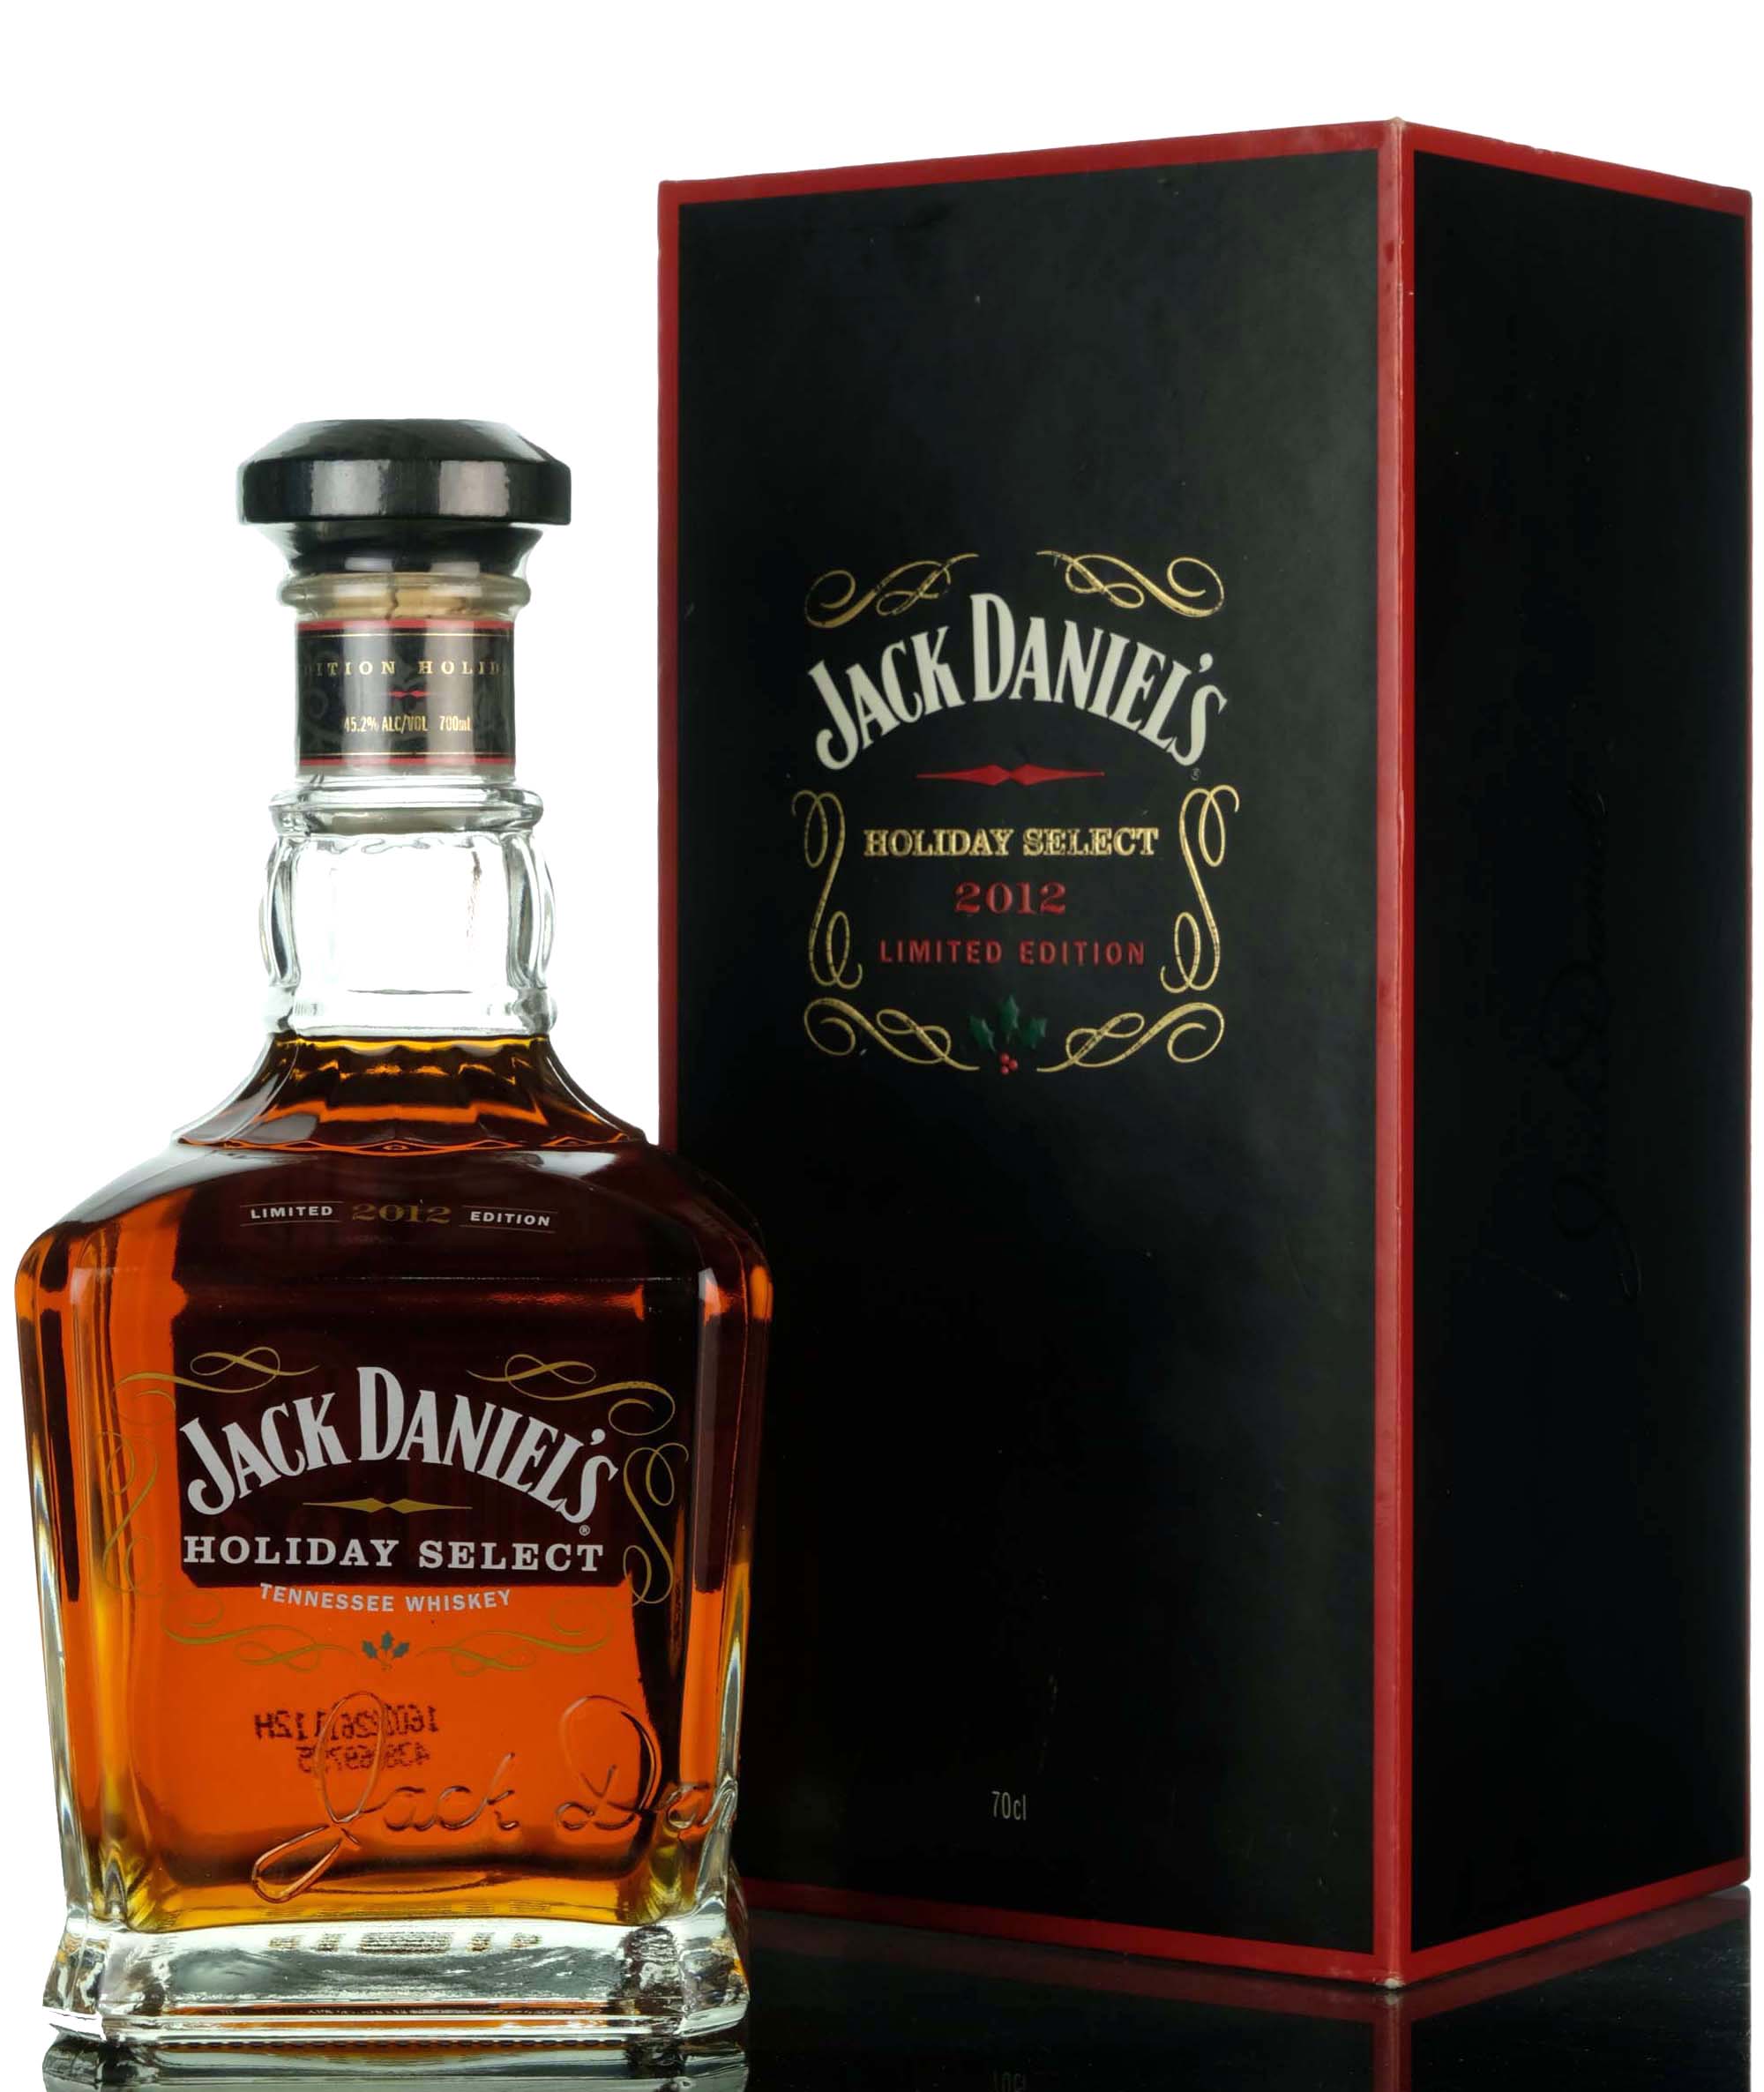 Jack Daniels Holiday Select - 2012 Release